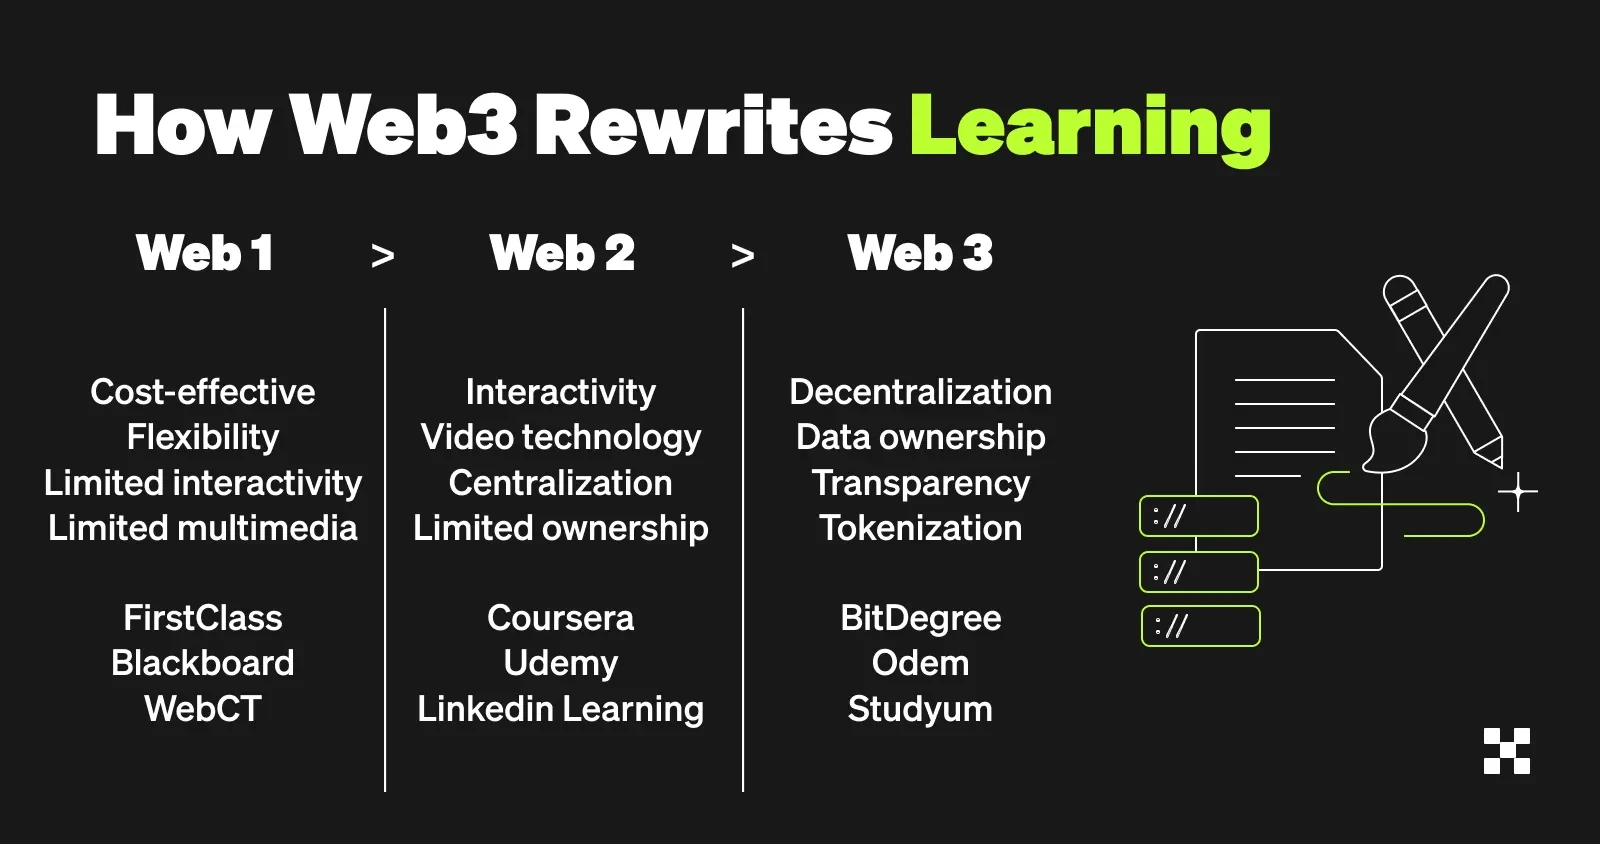 How Web3 rewrites learning